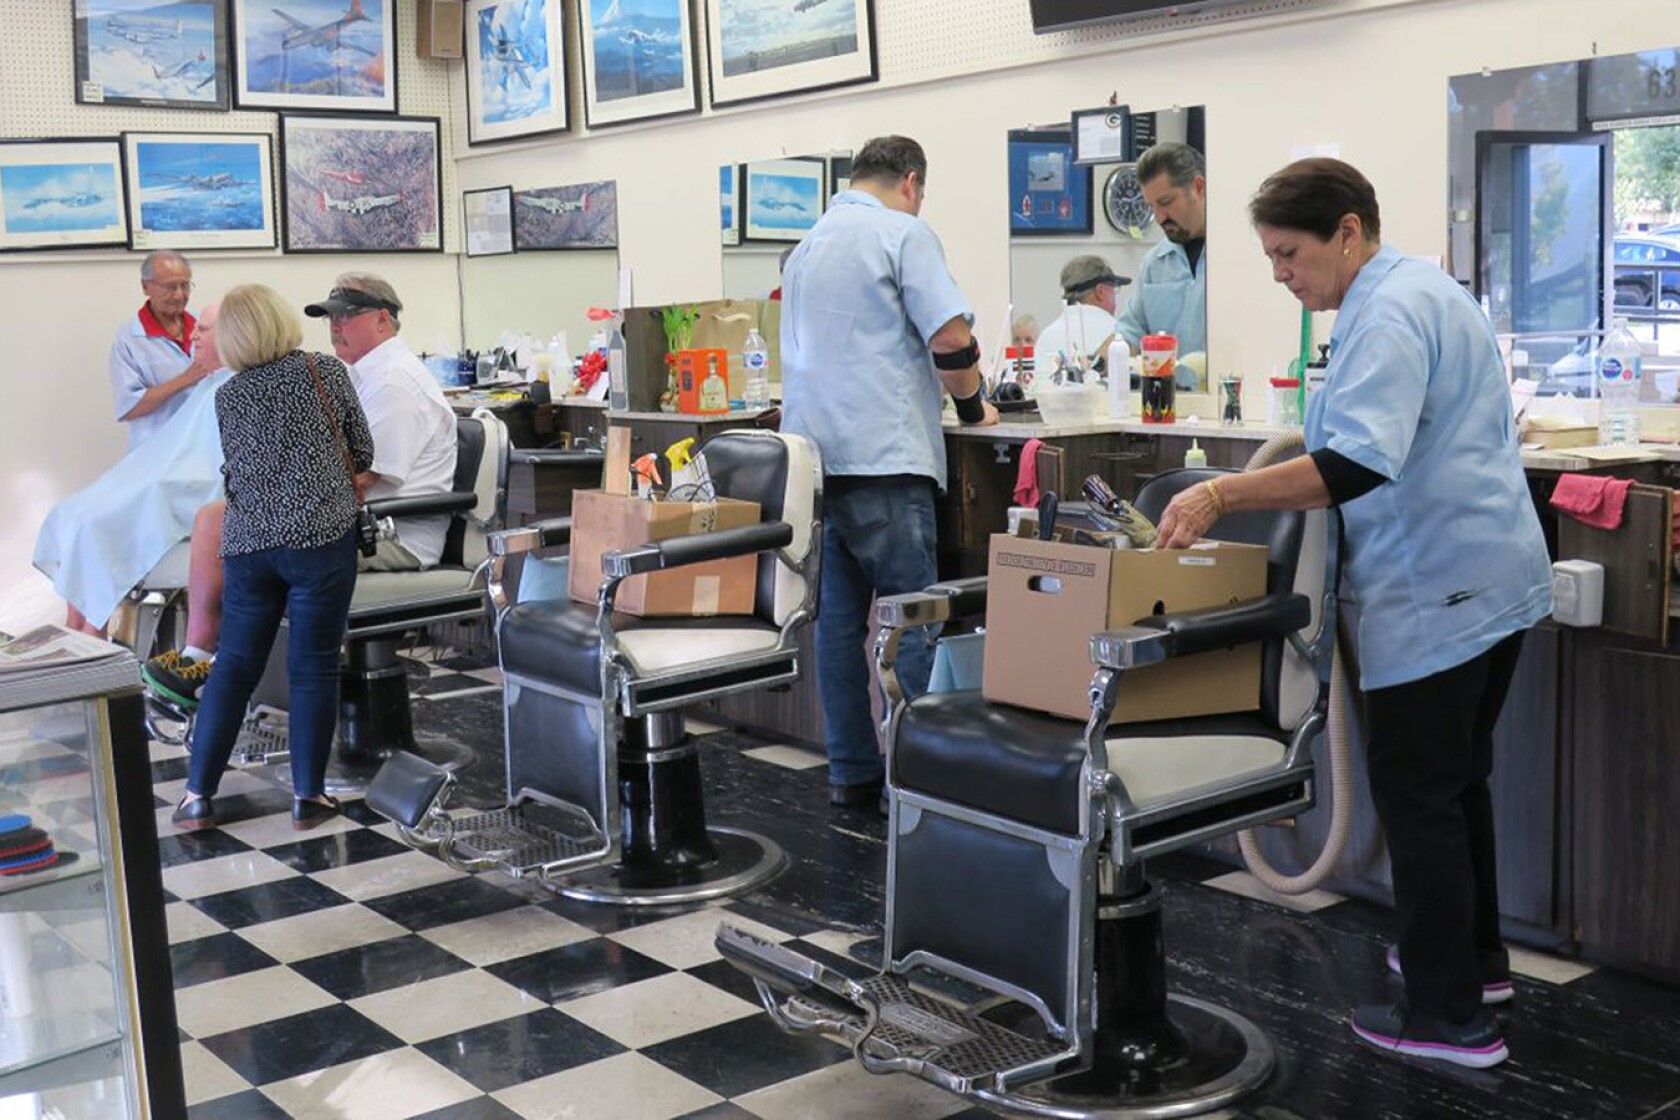 Paco S Barber Shop Closes For Business After 57 Years Of